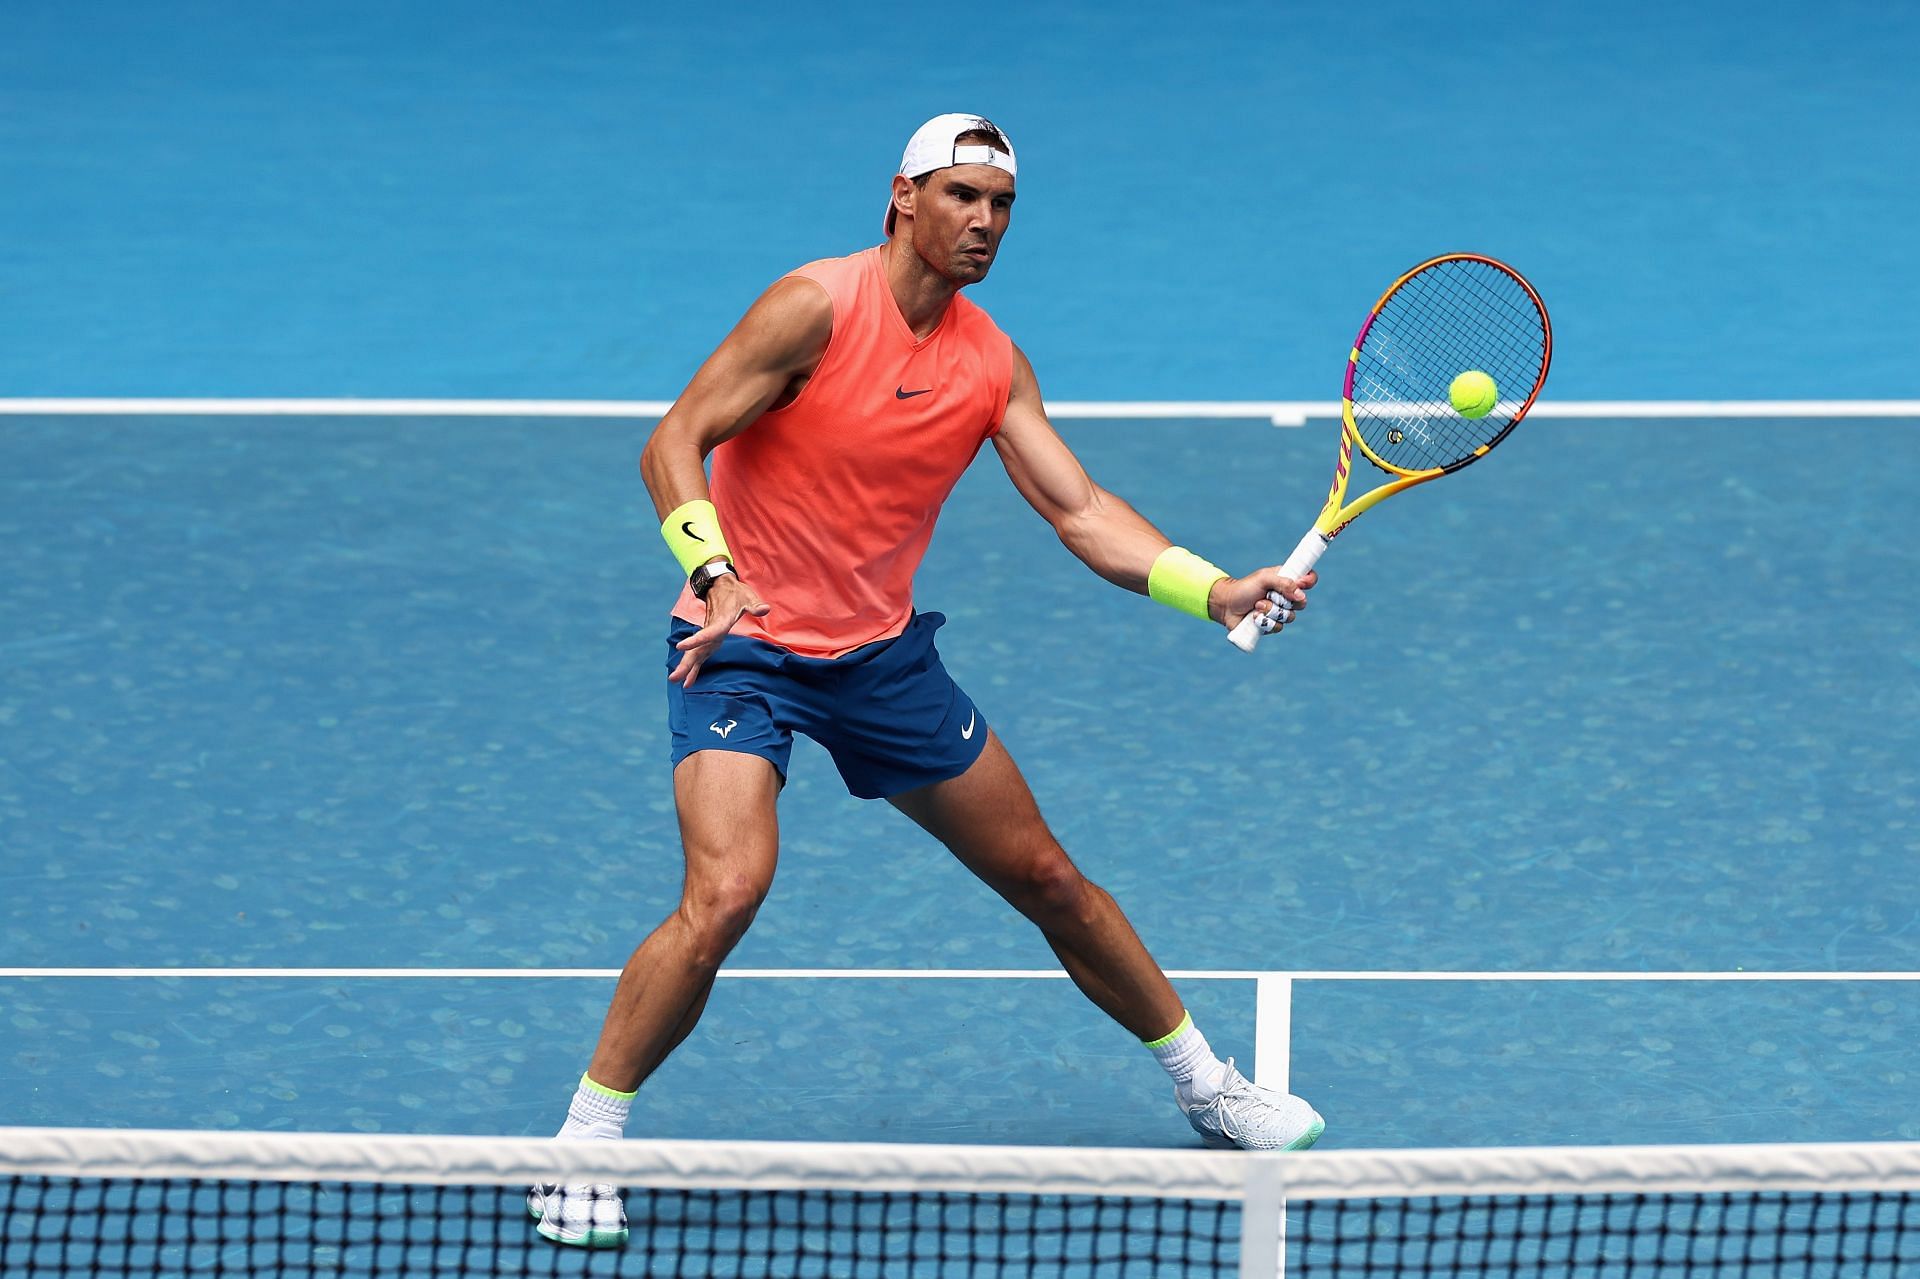 Rafael Nadal plays a volley during a practice session ahead of the 2023 Australian Open